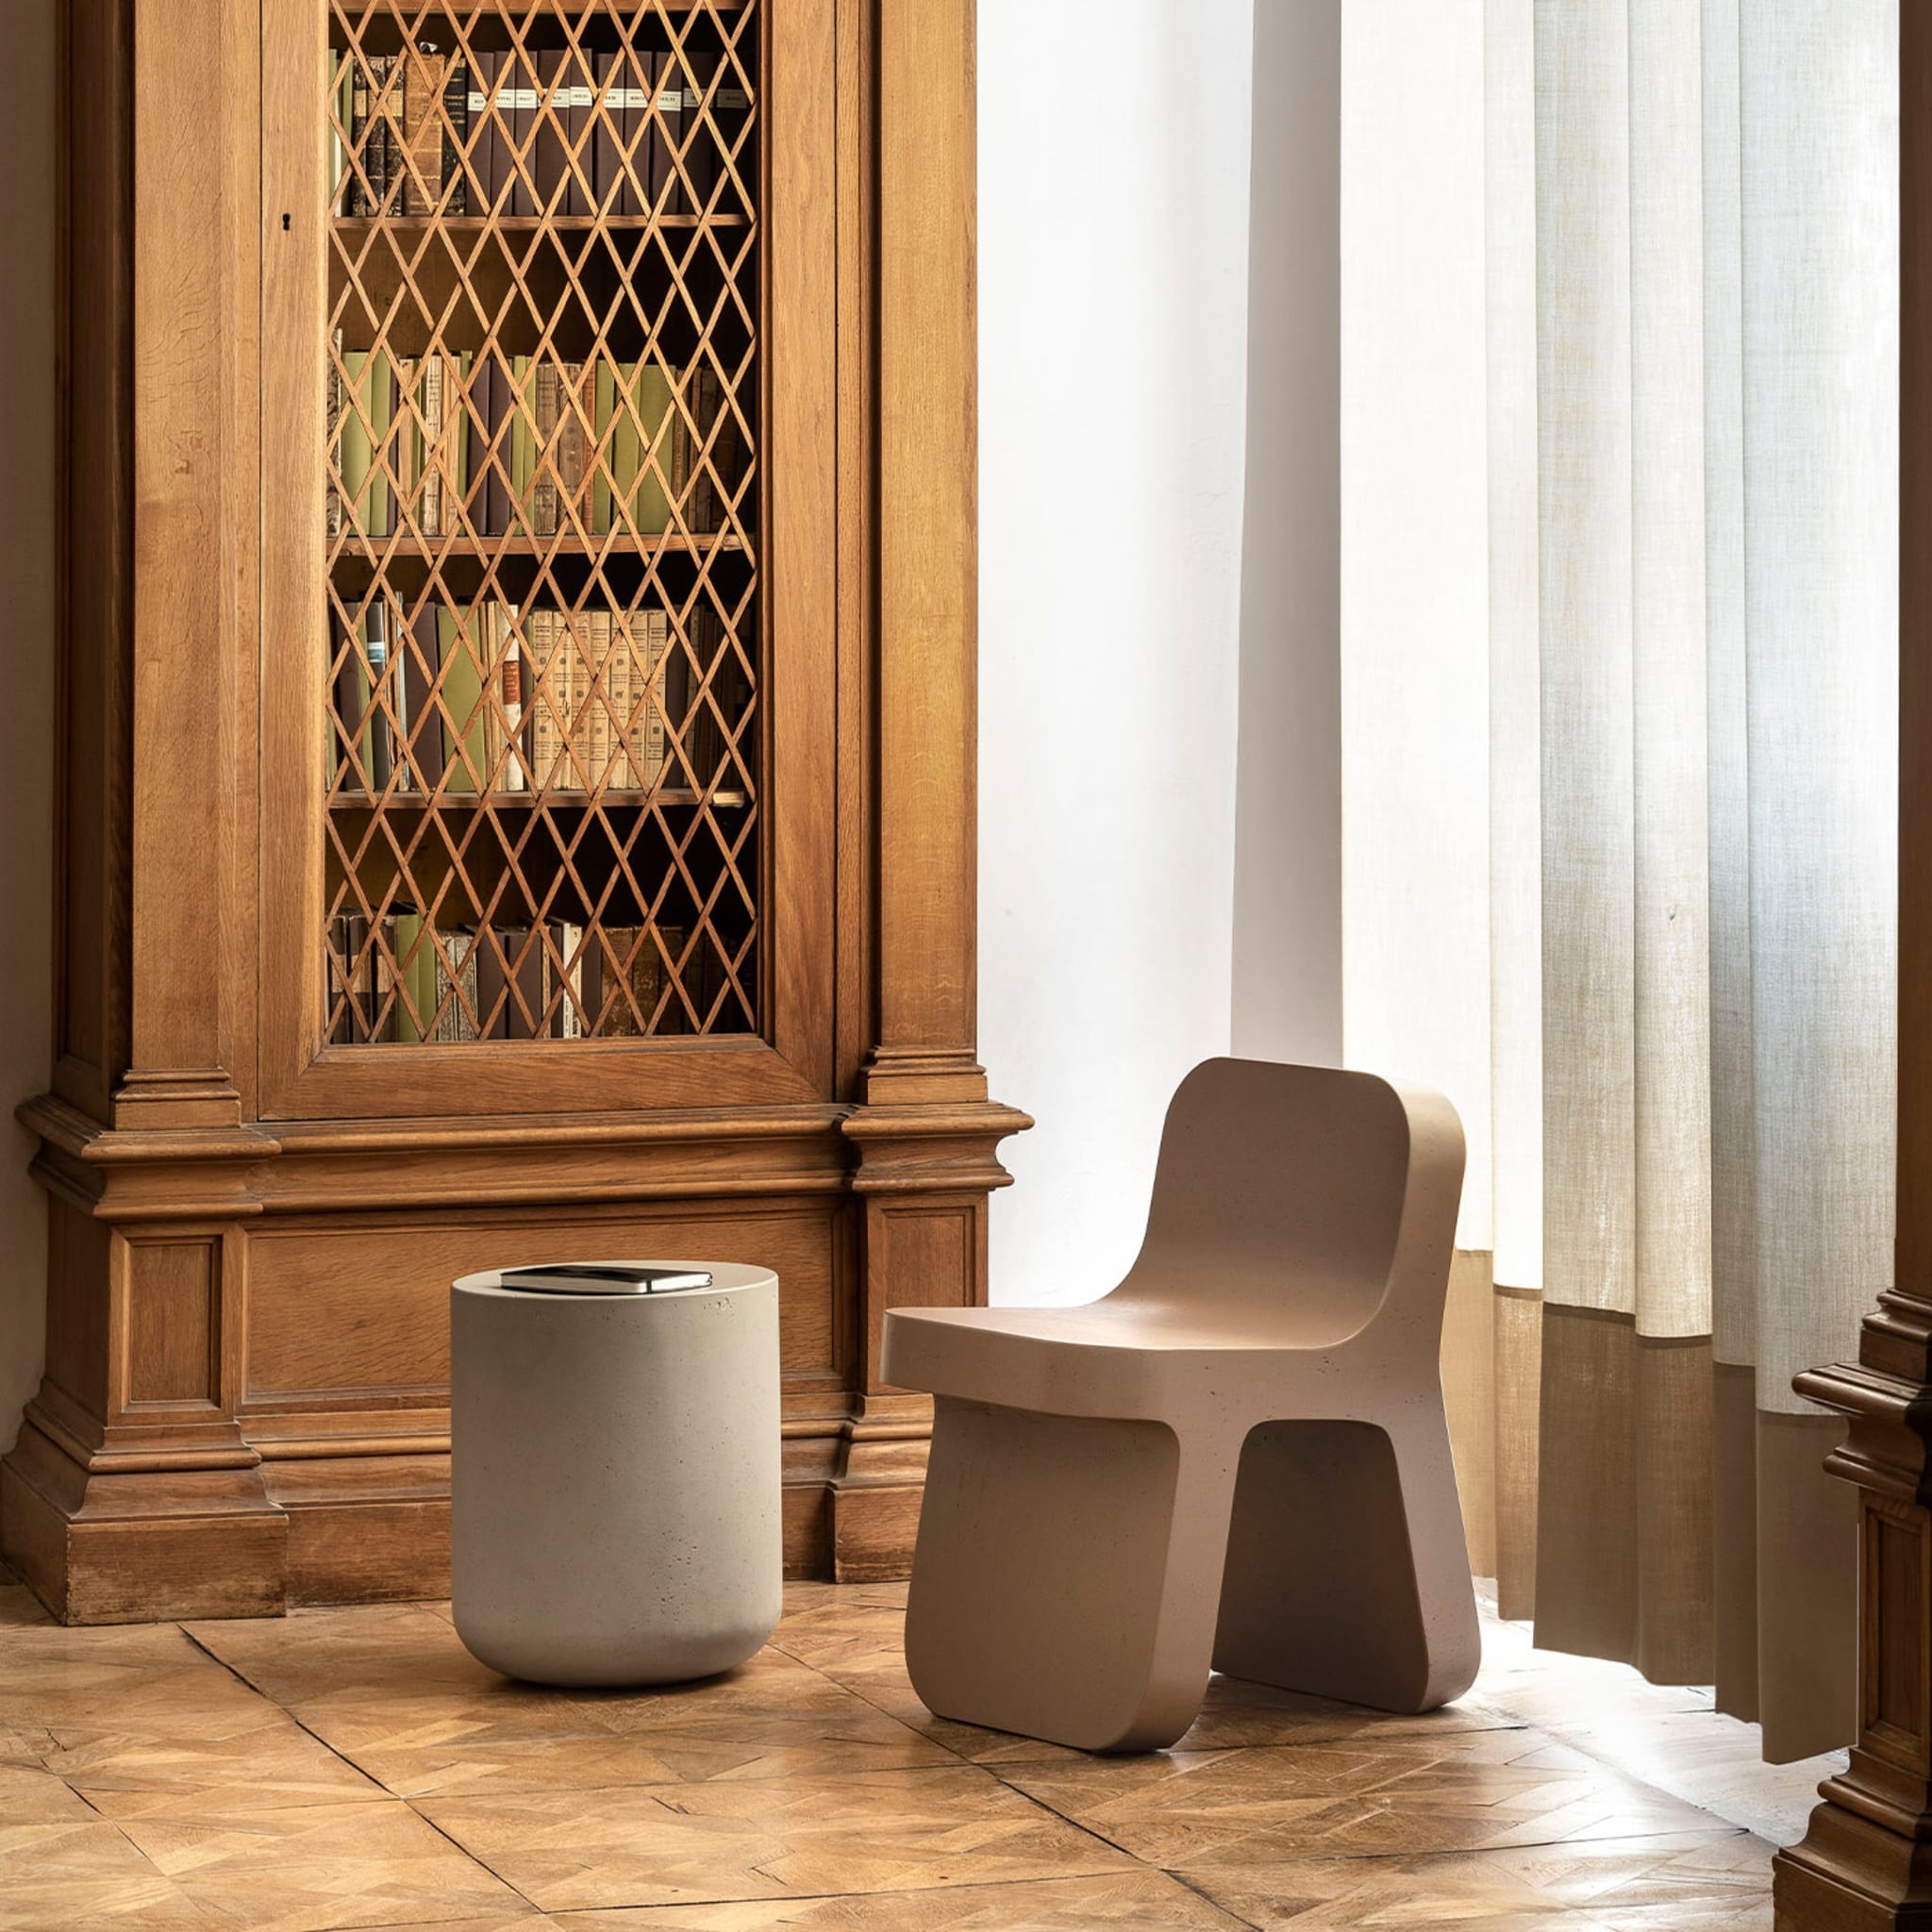 Zitella Stool by Parisotto and Formenton - Alternative view 2